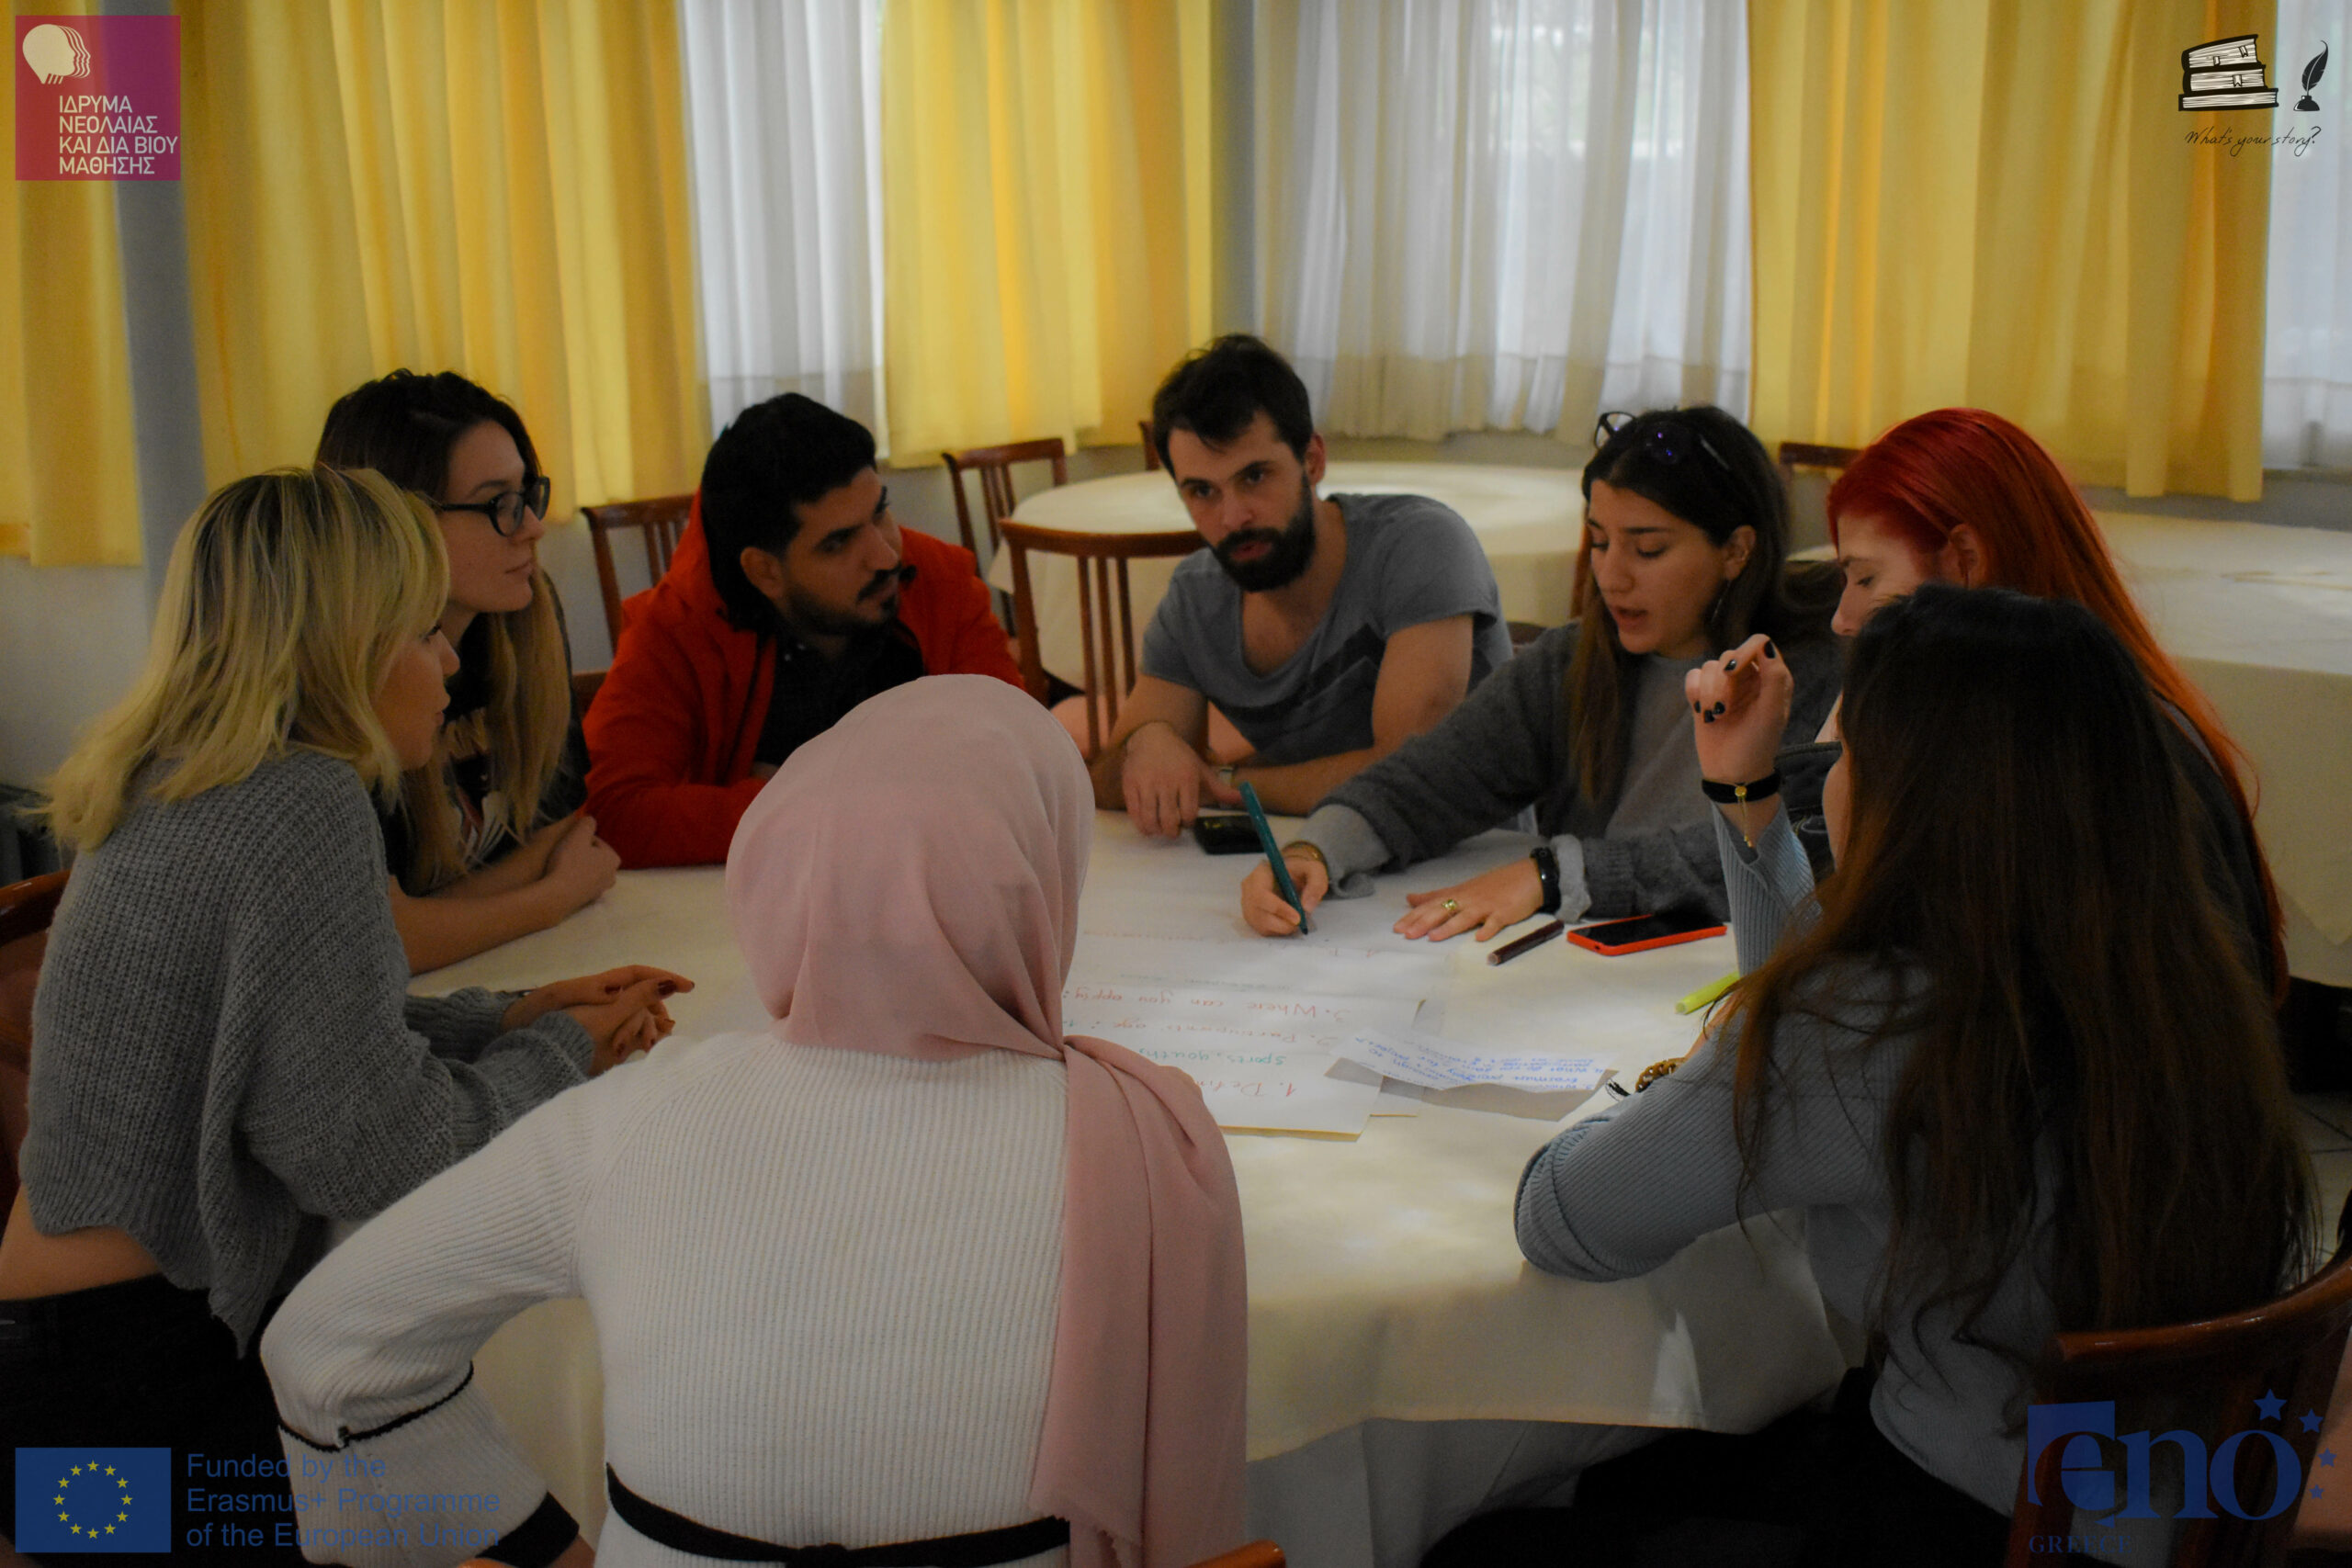 Desert Bloom participated in “What’s Your Story?” Youth Exchange, from 8-16 December 2019, Athens, Greece